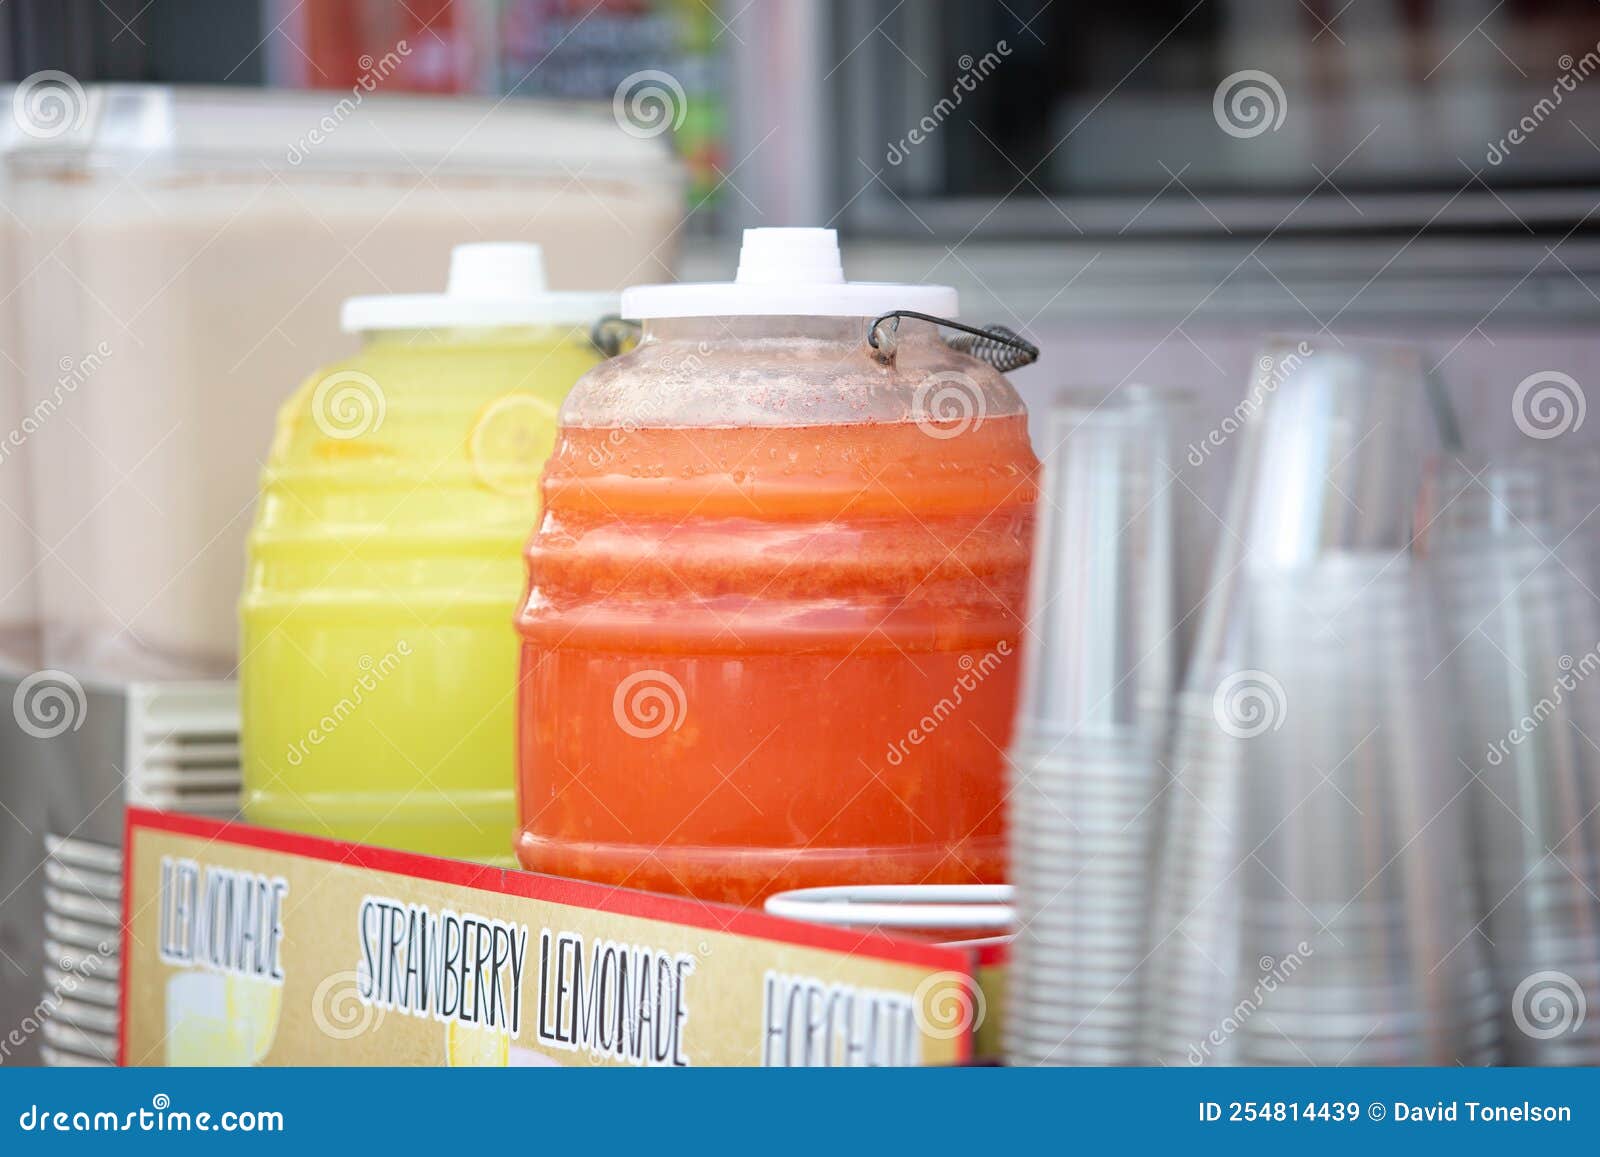 https://thumbs.dreamstime.com/z/large-containers-mexican-aguas-frescas-drinks-carnival-puyallup-washington-united-states-view-several-full-flavors-local-254814439.jpg